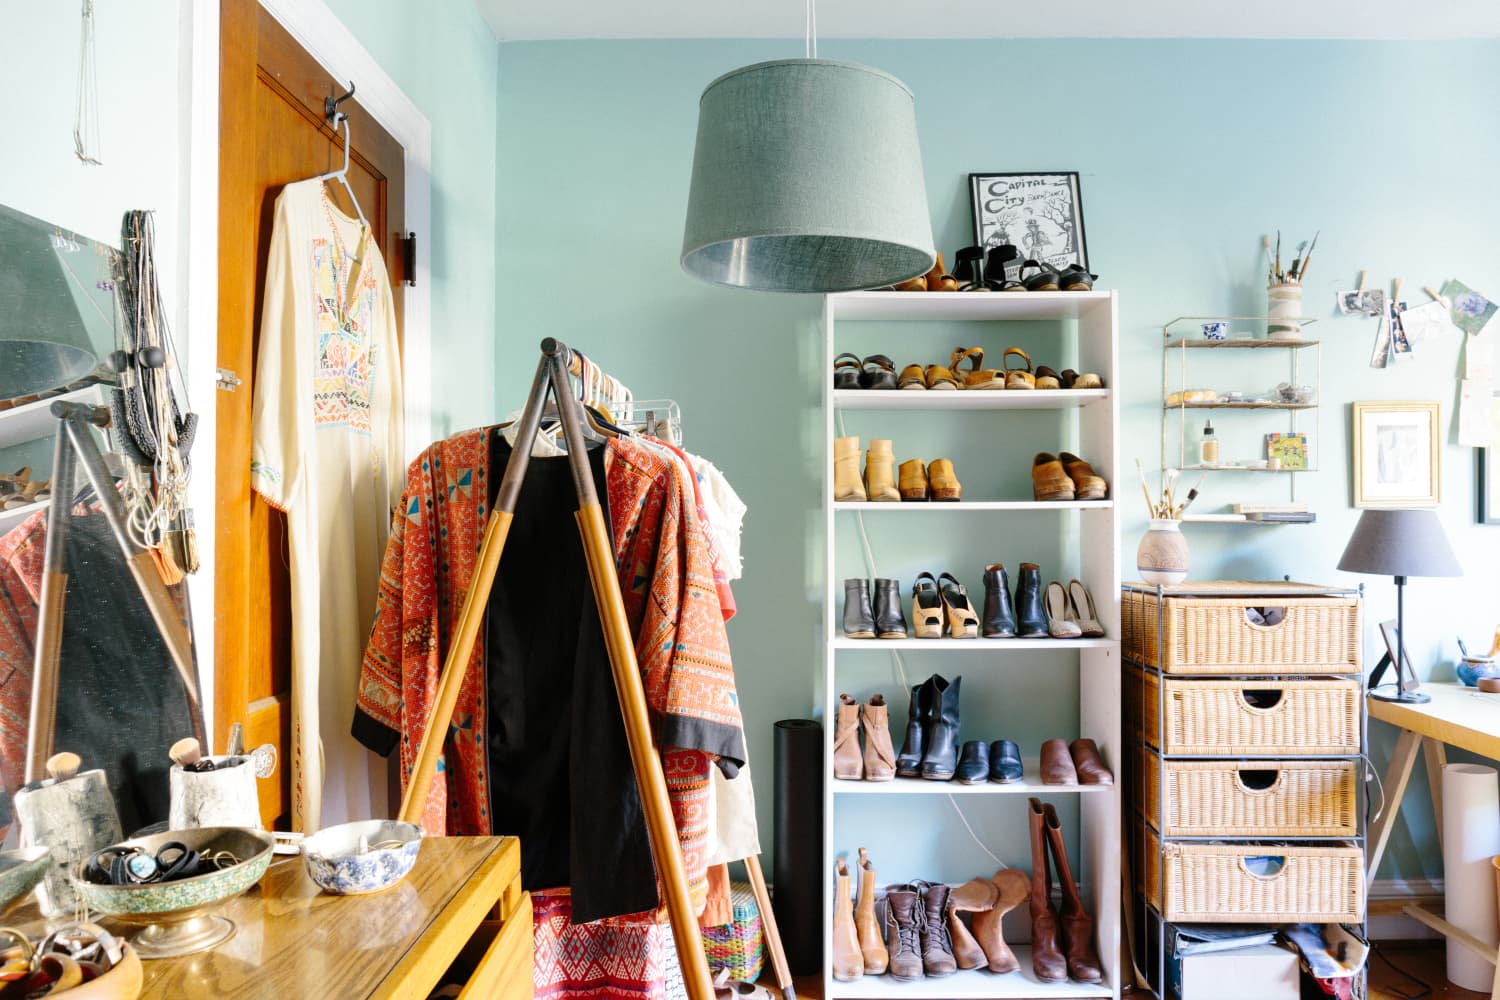 27 Stellar Shoe Storage Ideas For Small Spaces - Tiny Partments